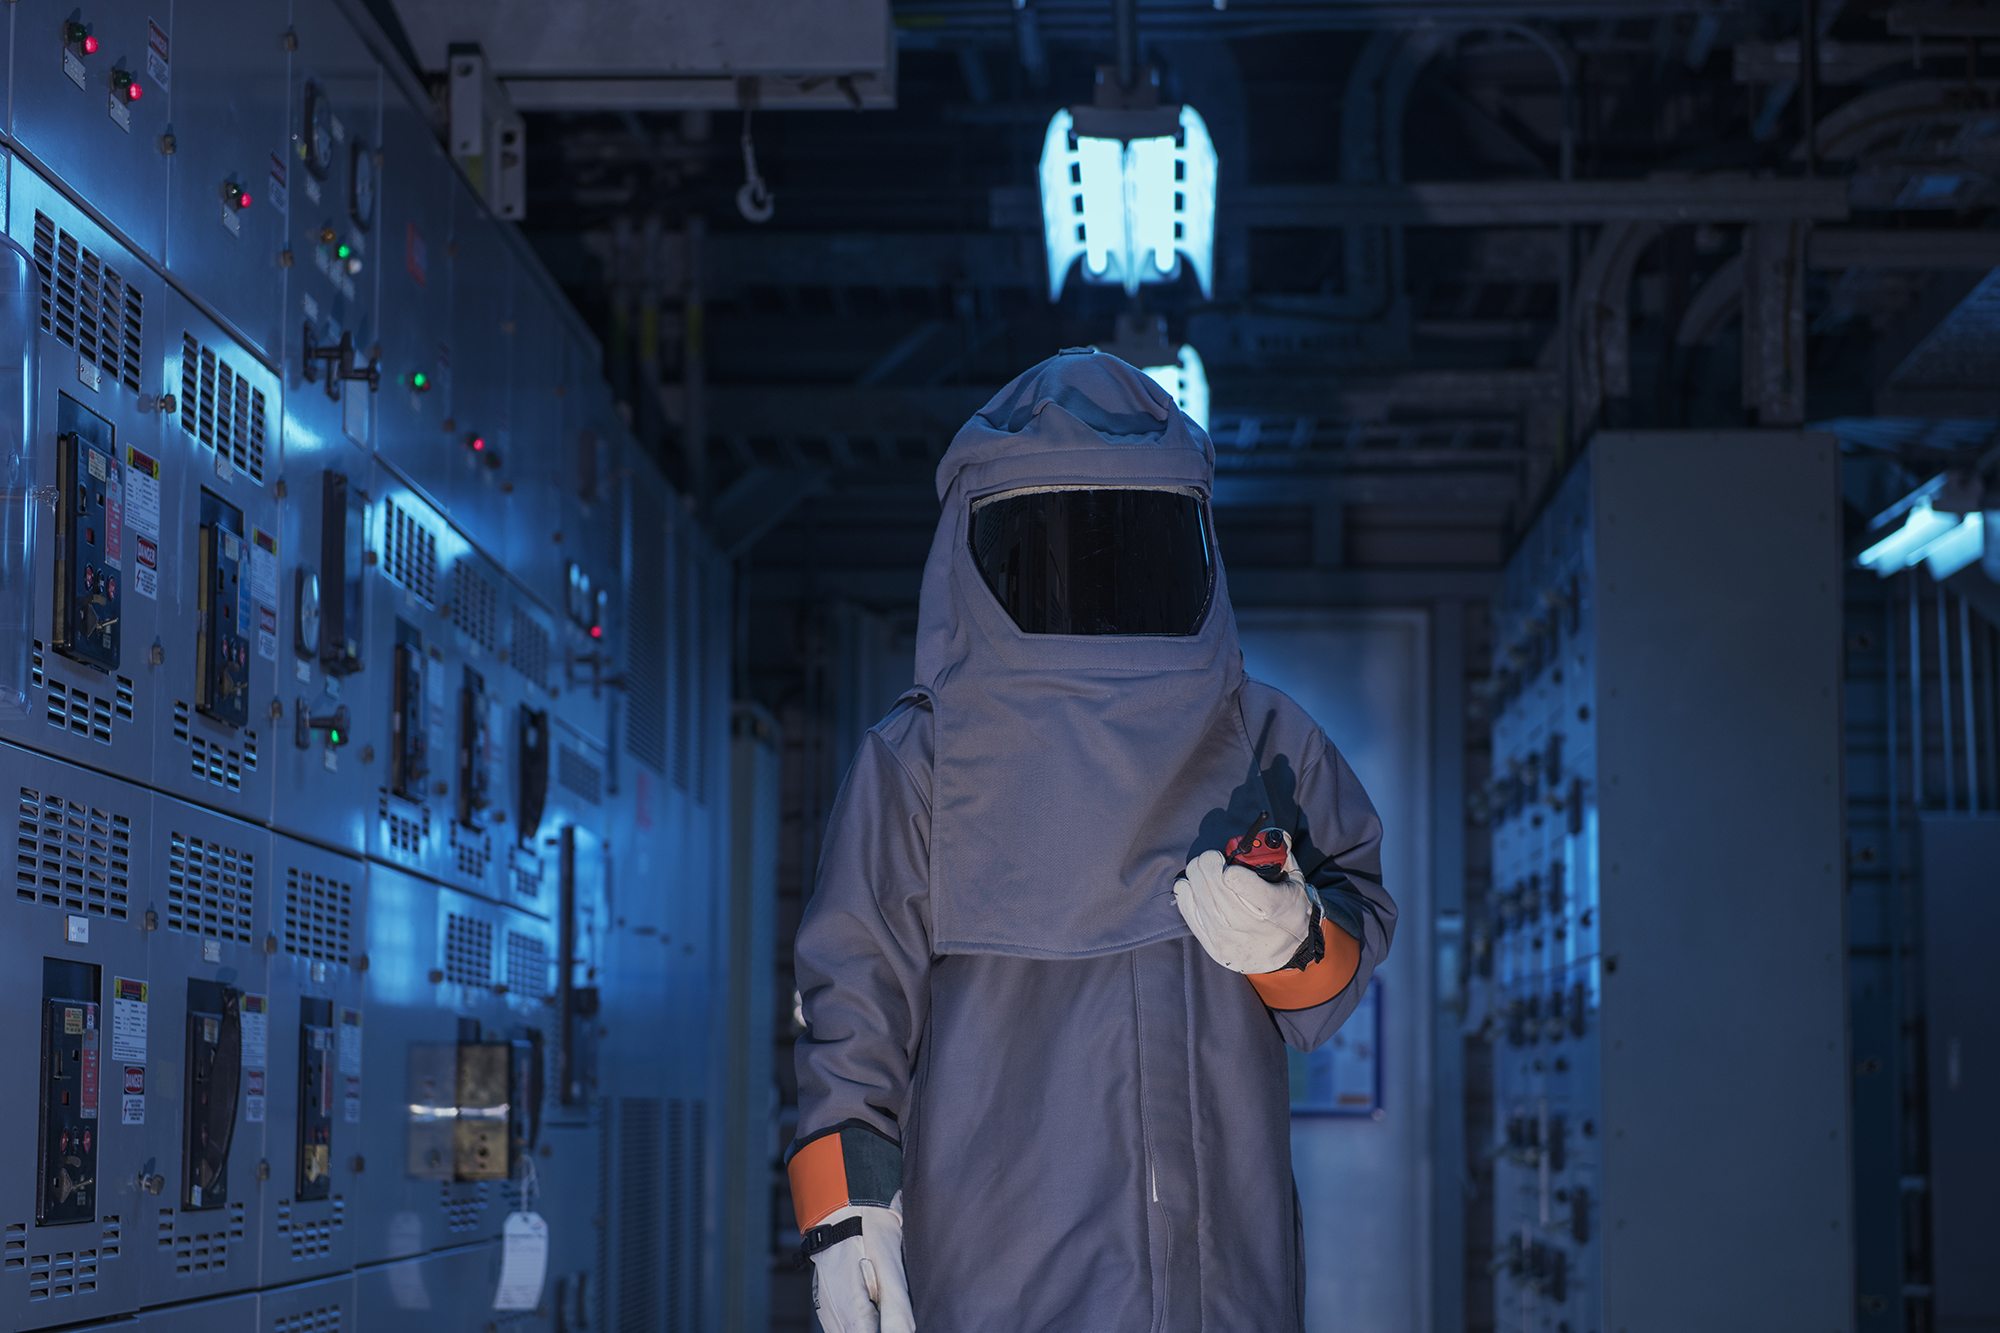 Arc flash risk assessment requirements